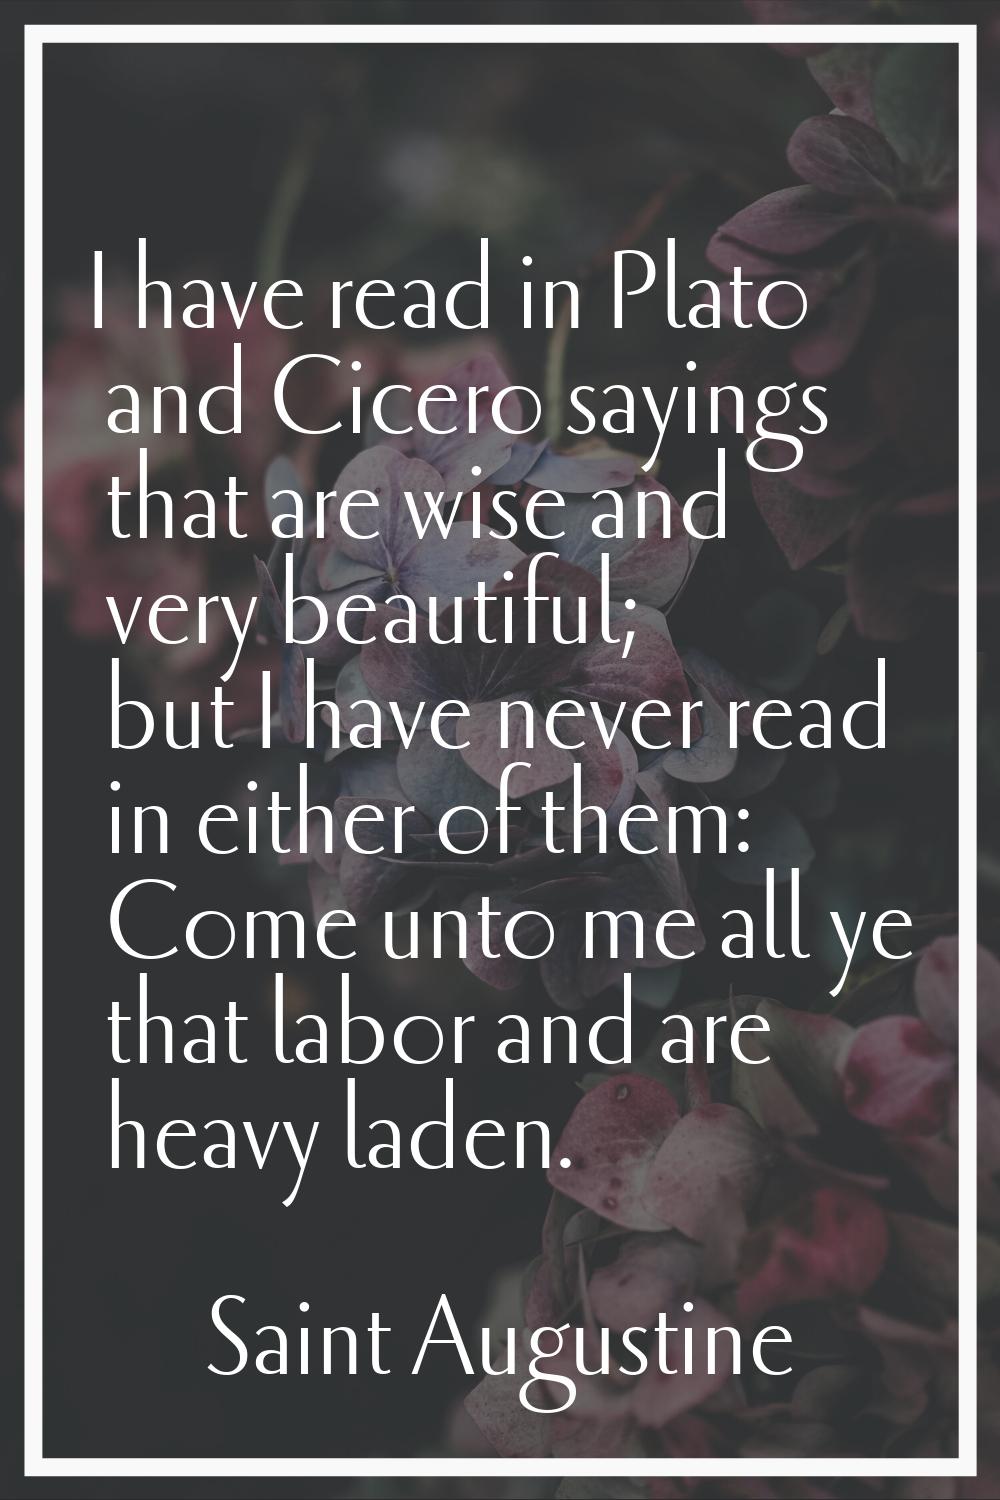 I have read in Plato and Cicero sayings that are wise and very beautiful; but I have never read in 